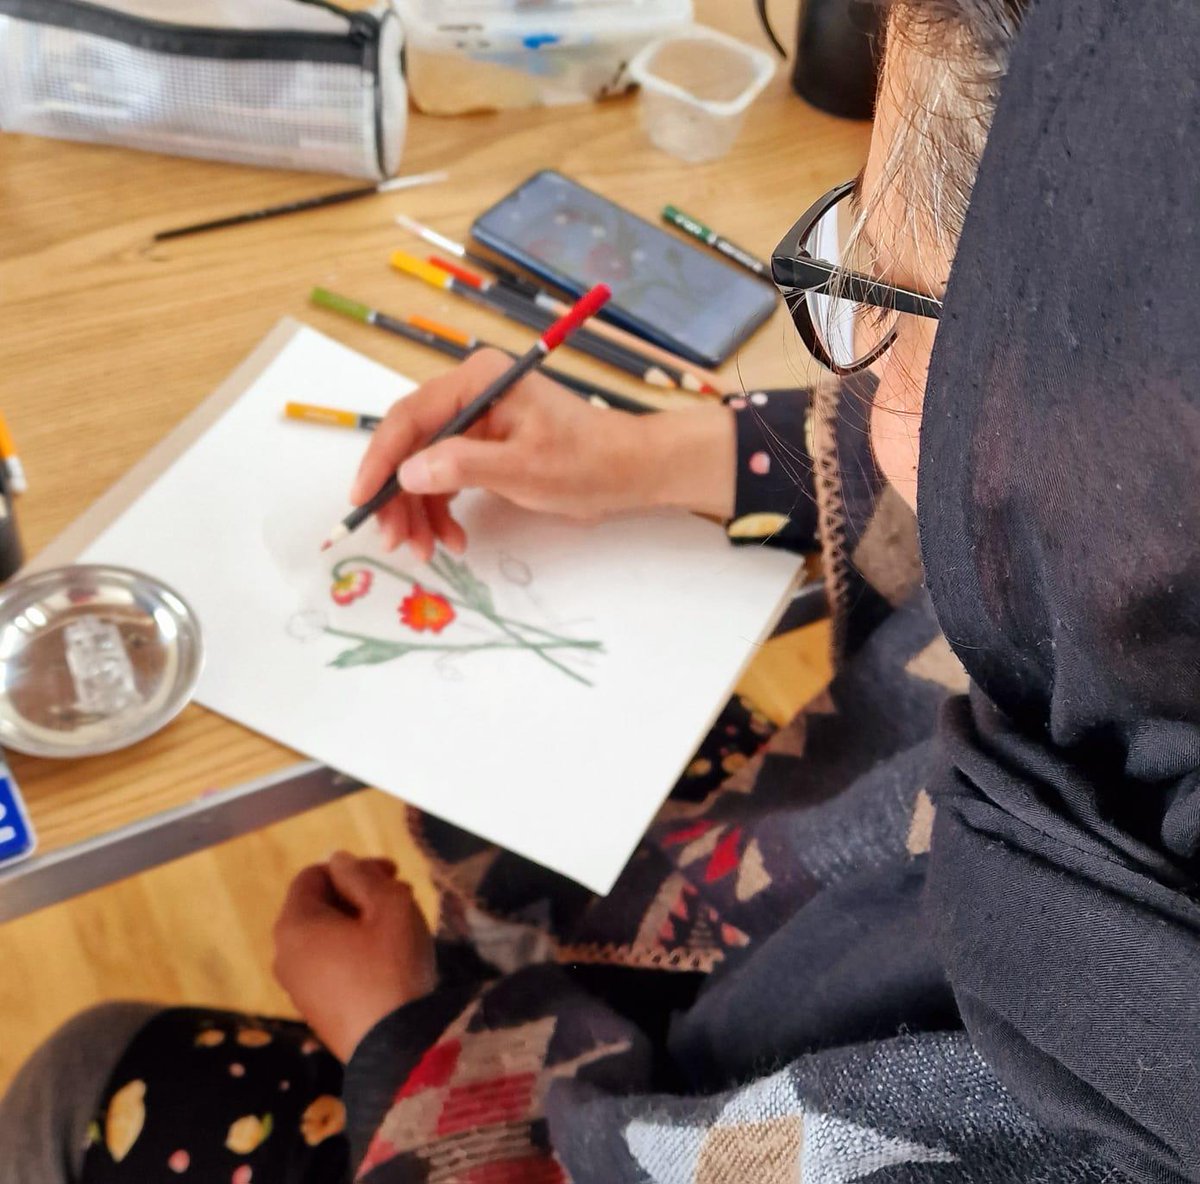 Our Multinational Women's Art Group at the Beacon Arts Centre creating more art pieces for The Art Exhibition as part of the Creative Minds event at The Beacon Arts Centre! Creative Minds 2024 takes place on May the 21st and 22nd 🙂

#creativeminds #Inverclyde #InverclydeCares